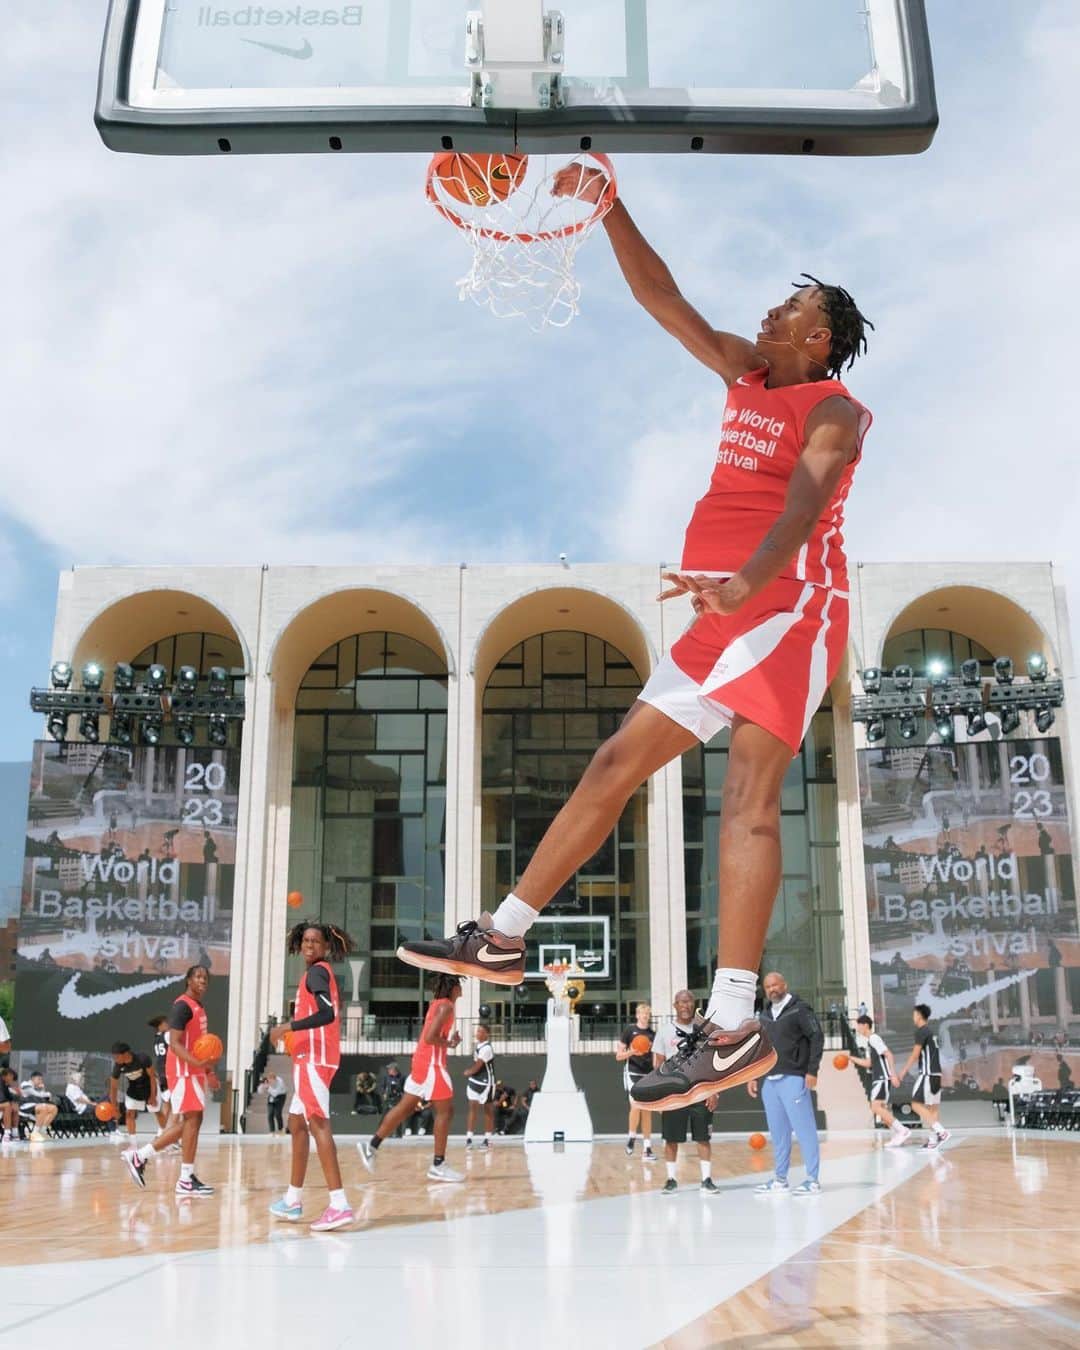 NikeNYCのインスタグラム：「It's time for champions to finish the script.  The 2023 Nike World Basketball Festival continues with more of everything.   ✅ HIGH LEVEL BASKETBALL ✅ SIGNATURE SNEAKERS ✅ GREAT MUSIC ✅ ELITE VIBES   Don't be the only one missing on the checklist at the end of the movie.   #OnlyBasketball」